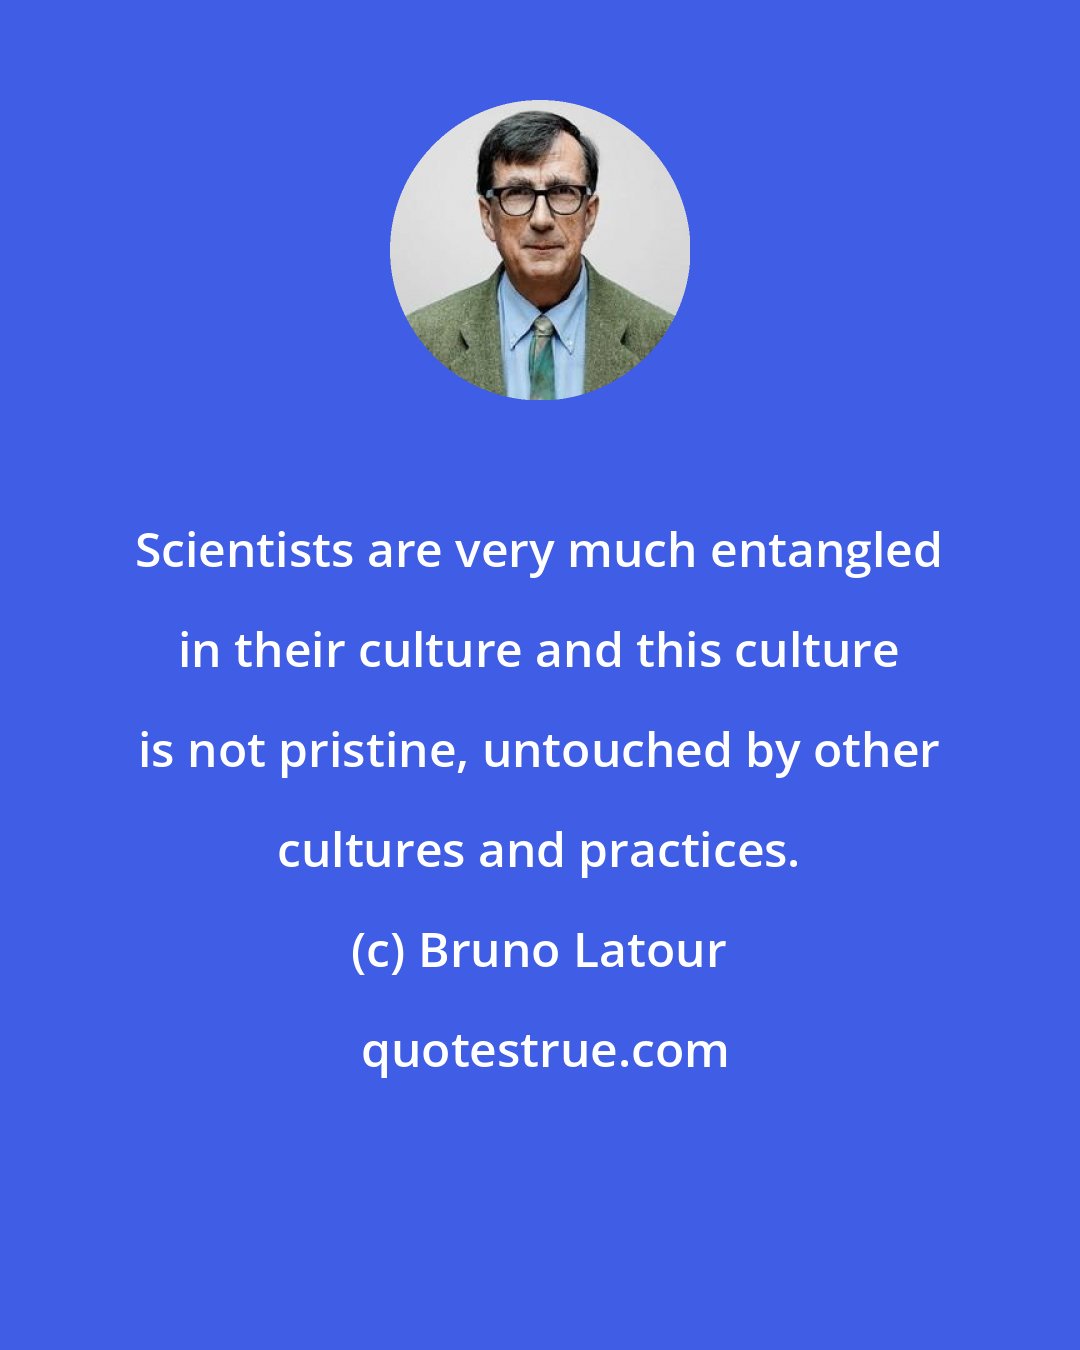 Bruno Latour: Scientists are very much entangled in their culture and this culture is not pristine, untouched by other cultures and practices.